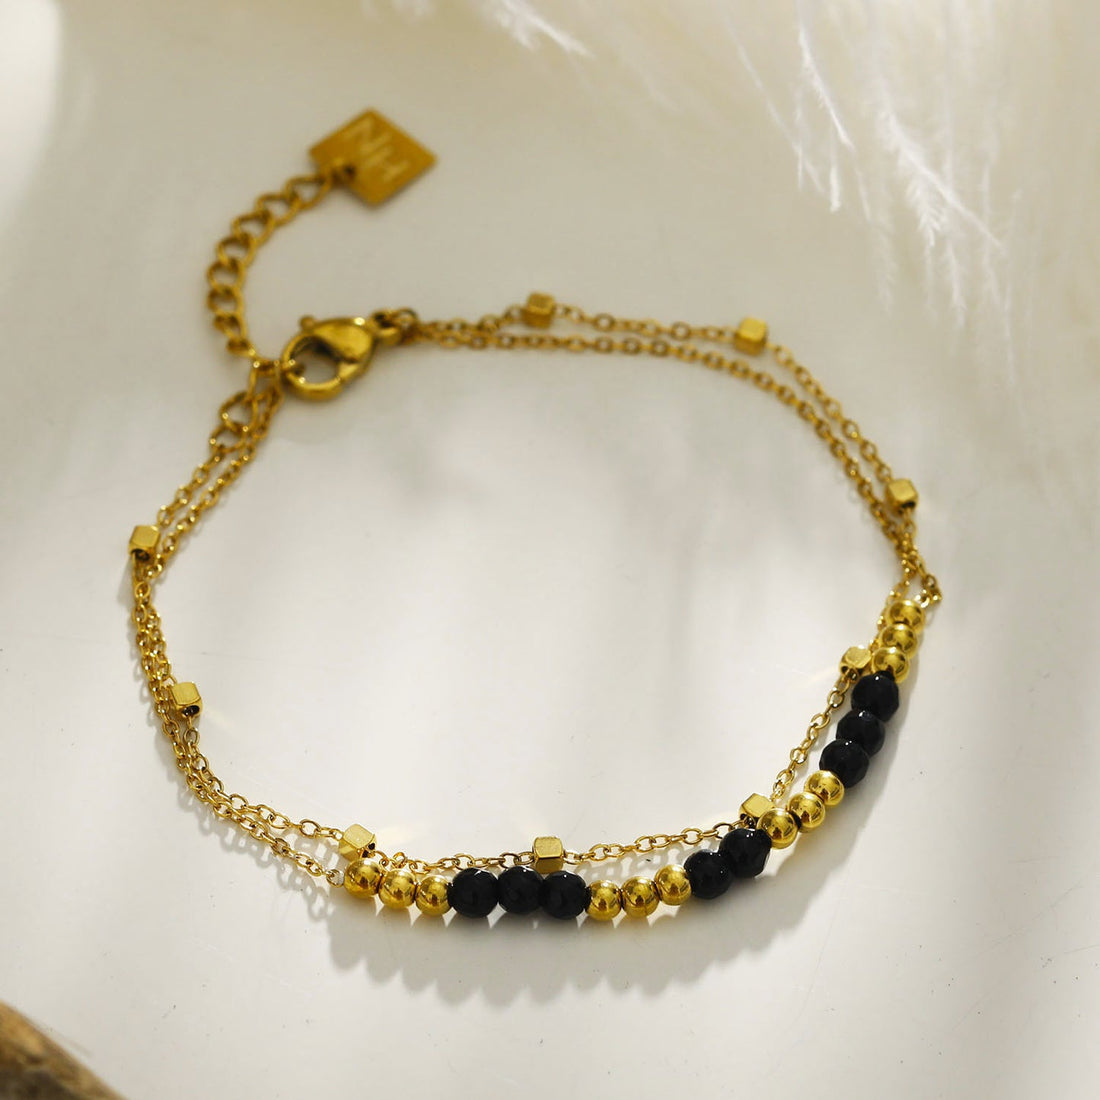 Hackney Nine HILDA Two-in-One Square Beads &amp; Round Beads in Black &amp; Gold Bracelet.